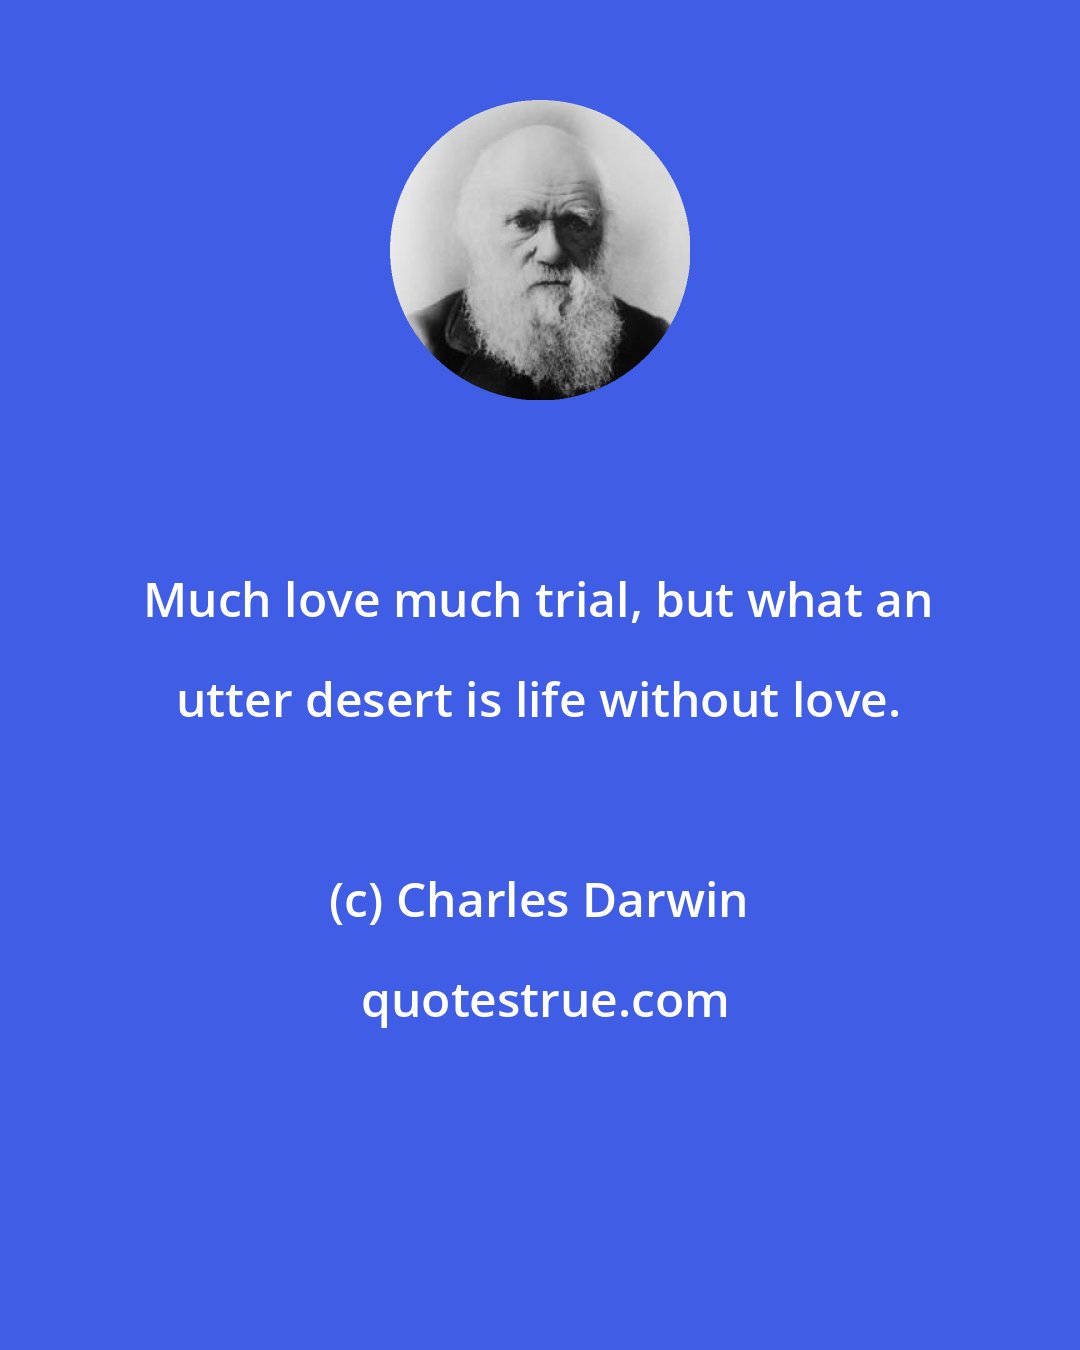 Charles Darwin: Much love much trial, but what an utter desert is life without love.